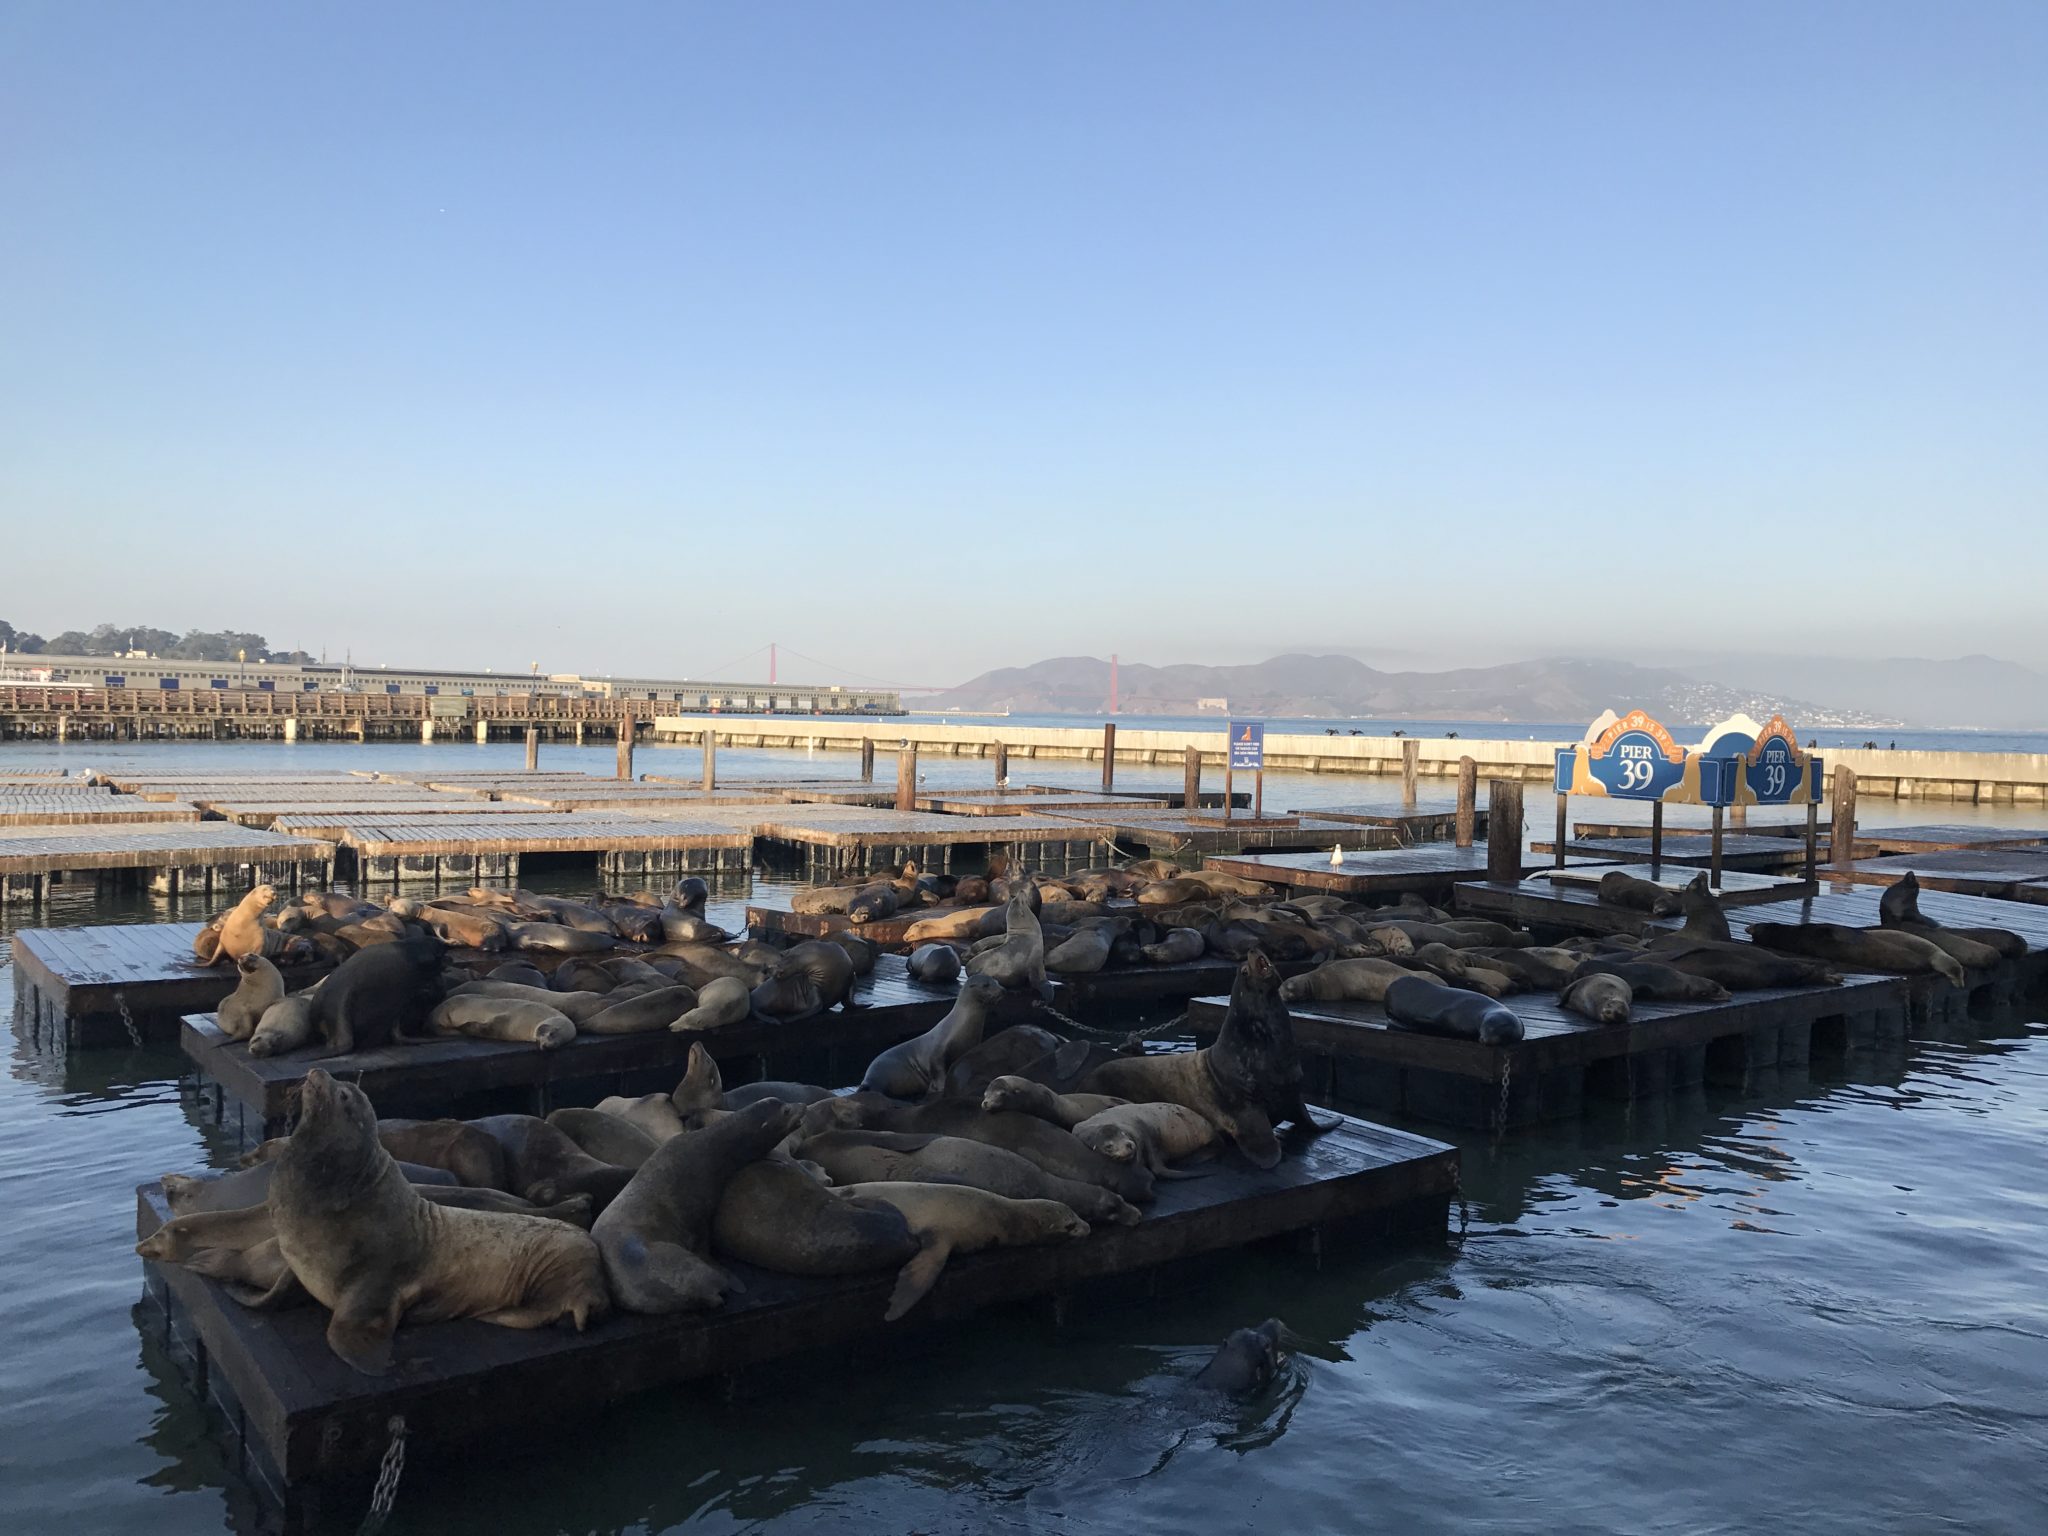 a group of seals lying on floating platforms in water